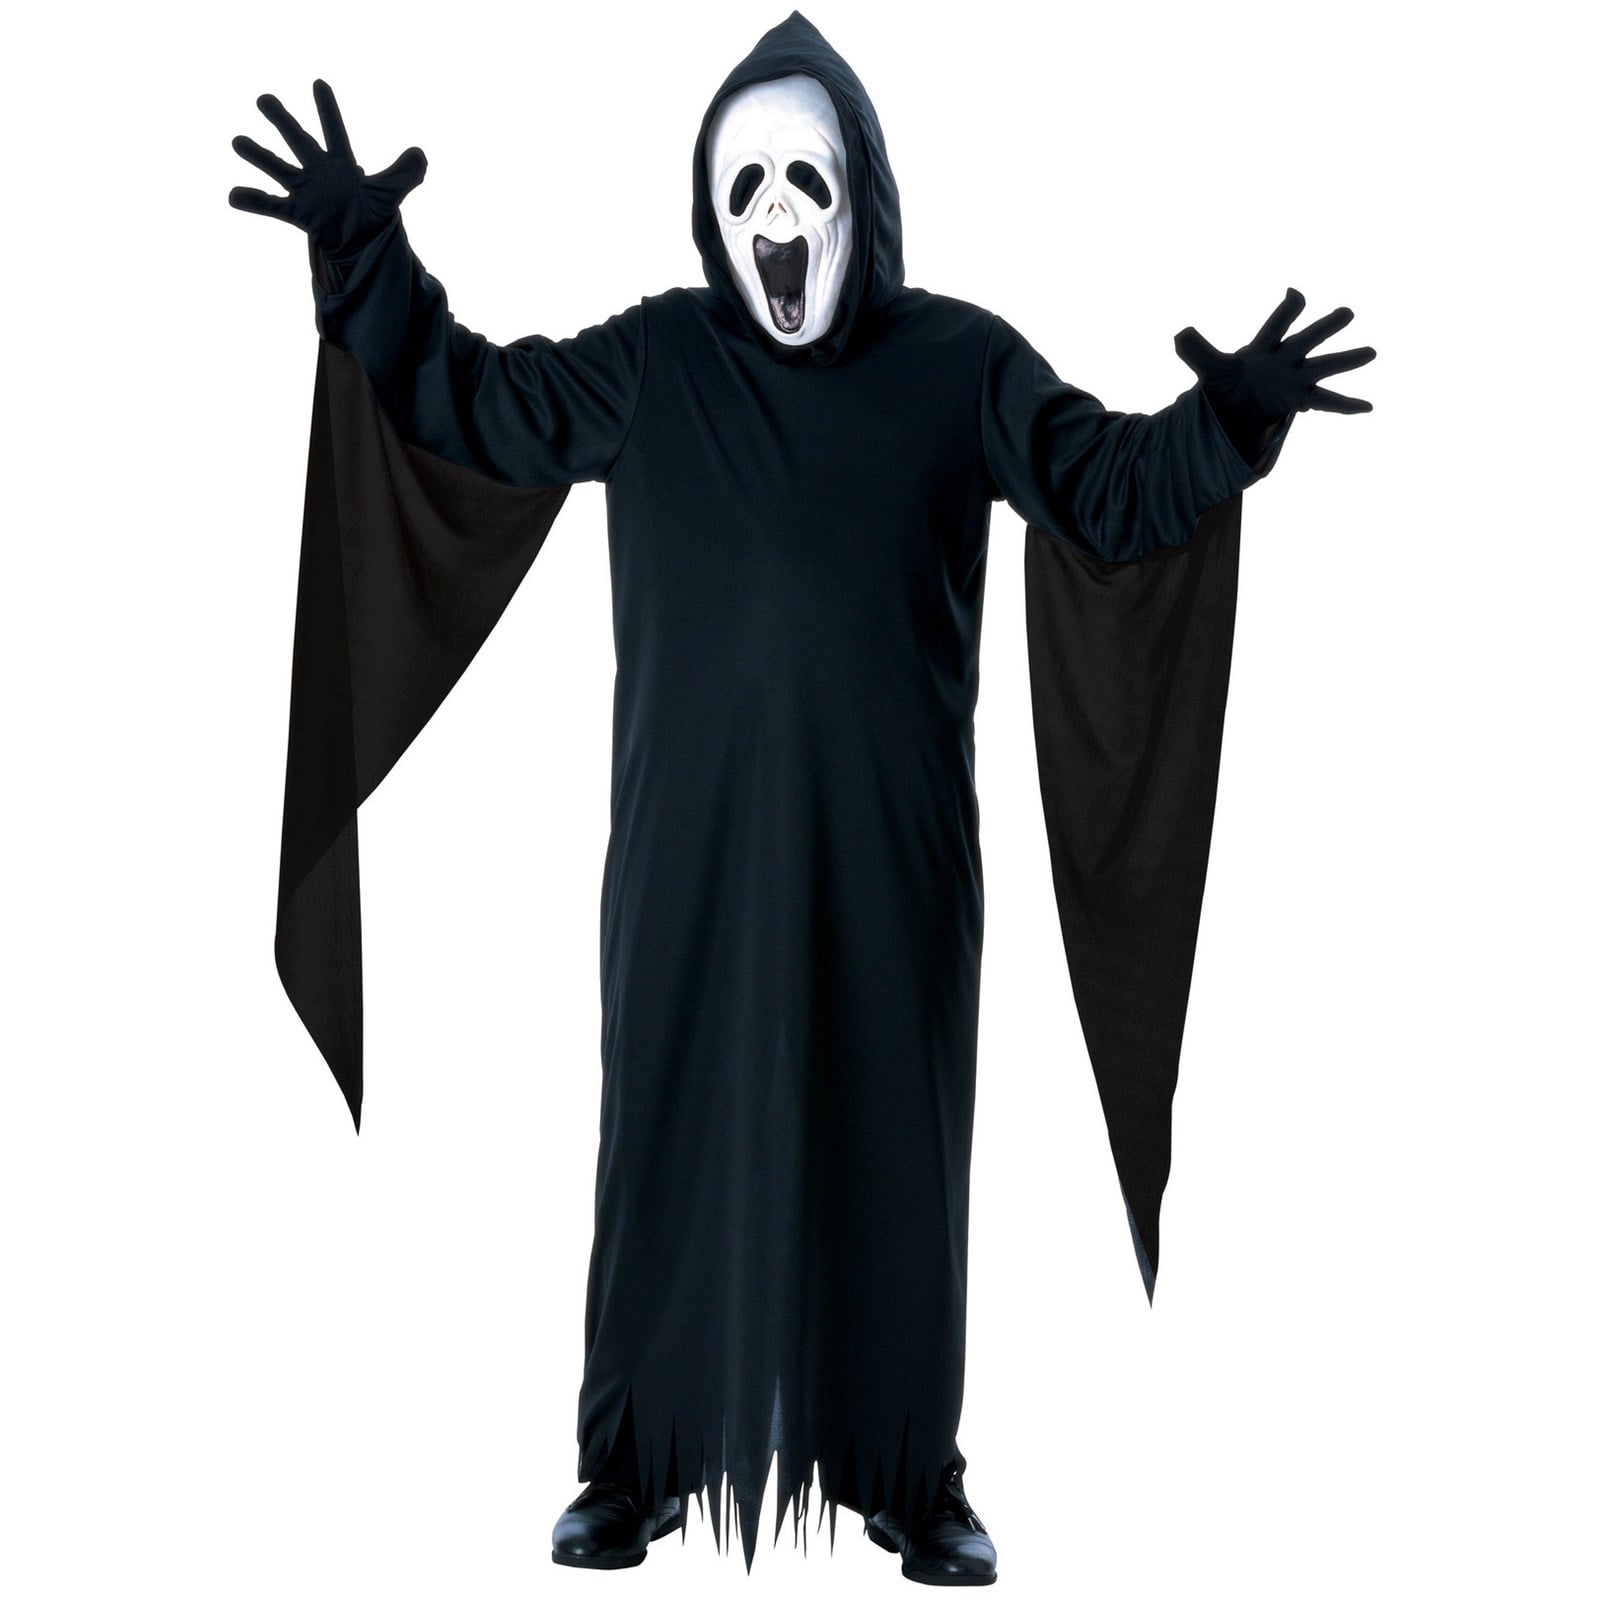 Complete Ghostface costume affordable.